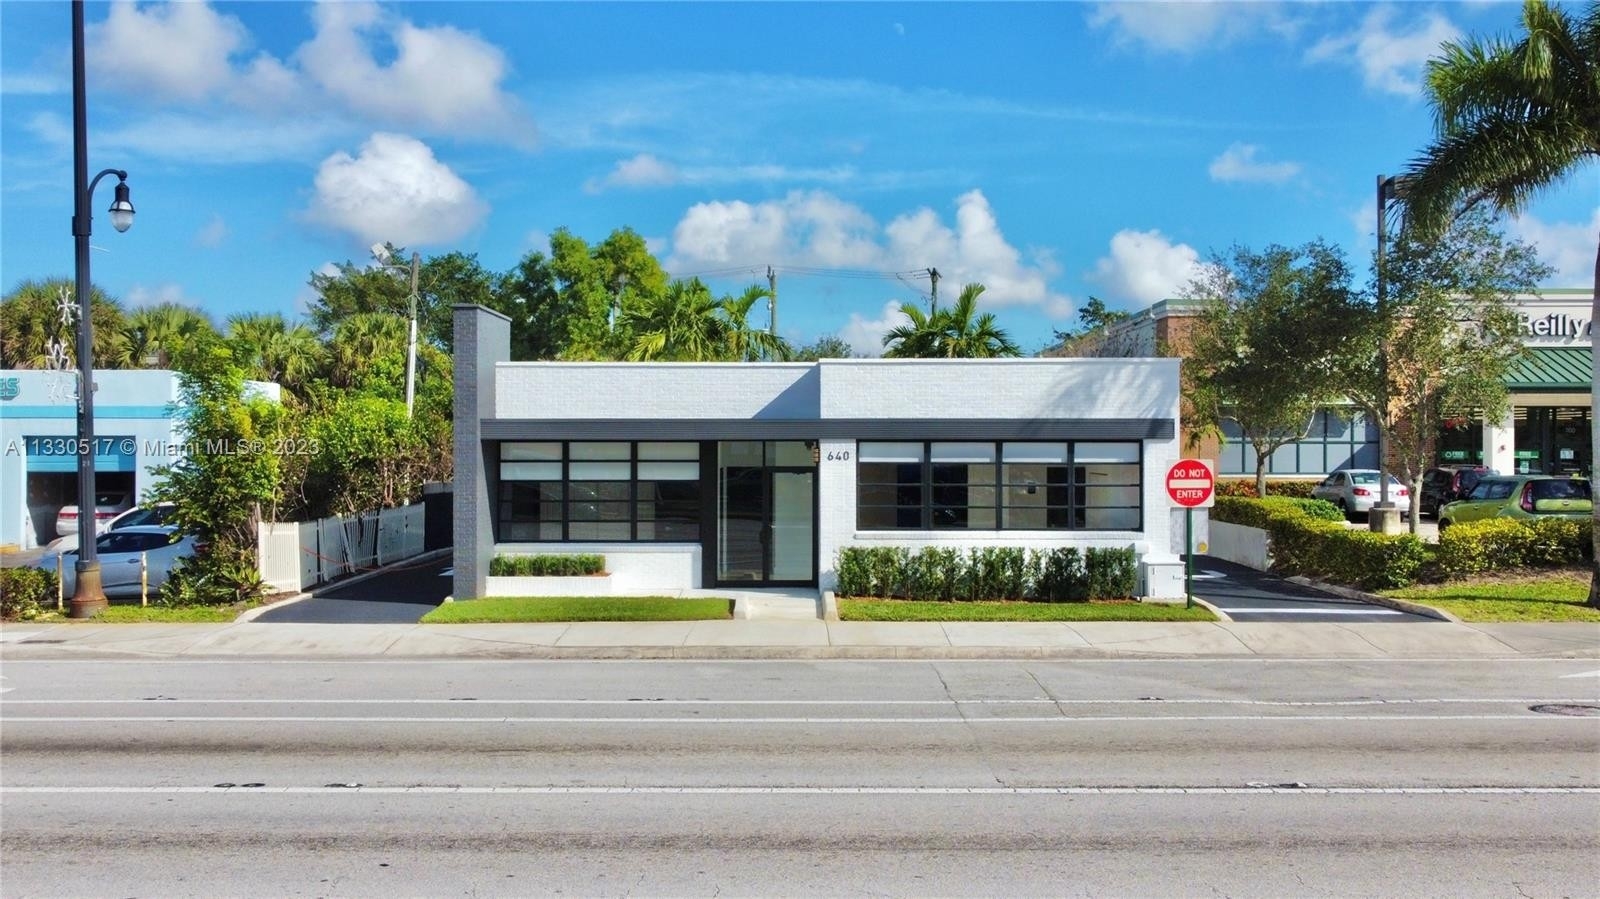 Retail Leases for Sale at Plantation, FL 33317